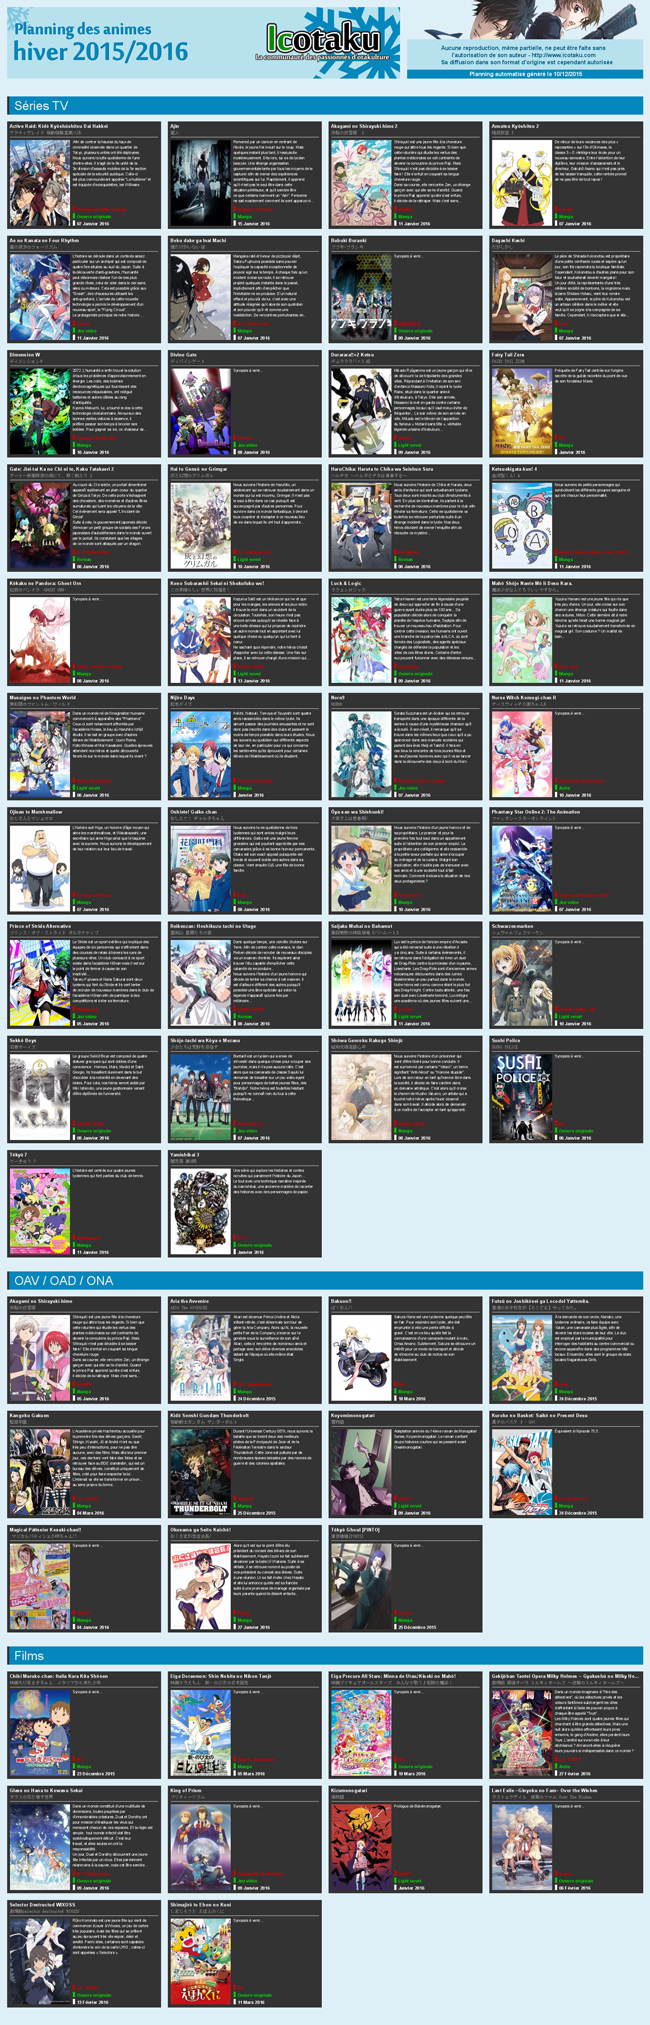 http://forum.icotaku.com/images/forum/plannings/hiver2016/planning_anime_hiver_2015_2016_mini.png